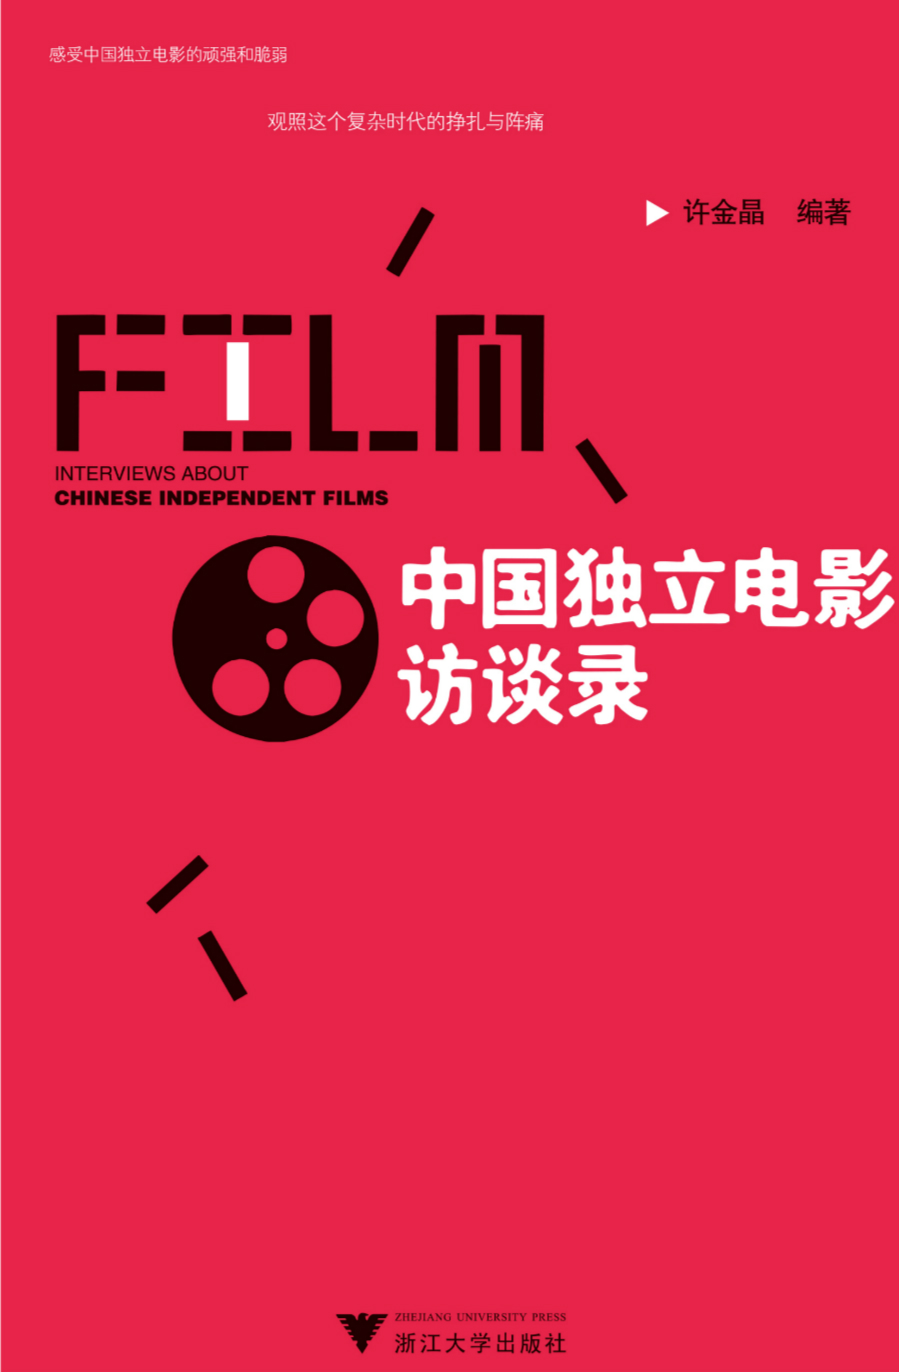 Interviews about Chinese Independent Films